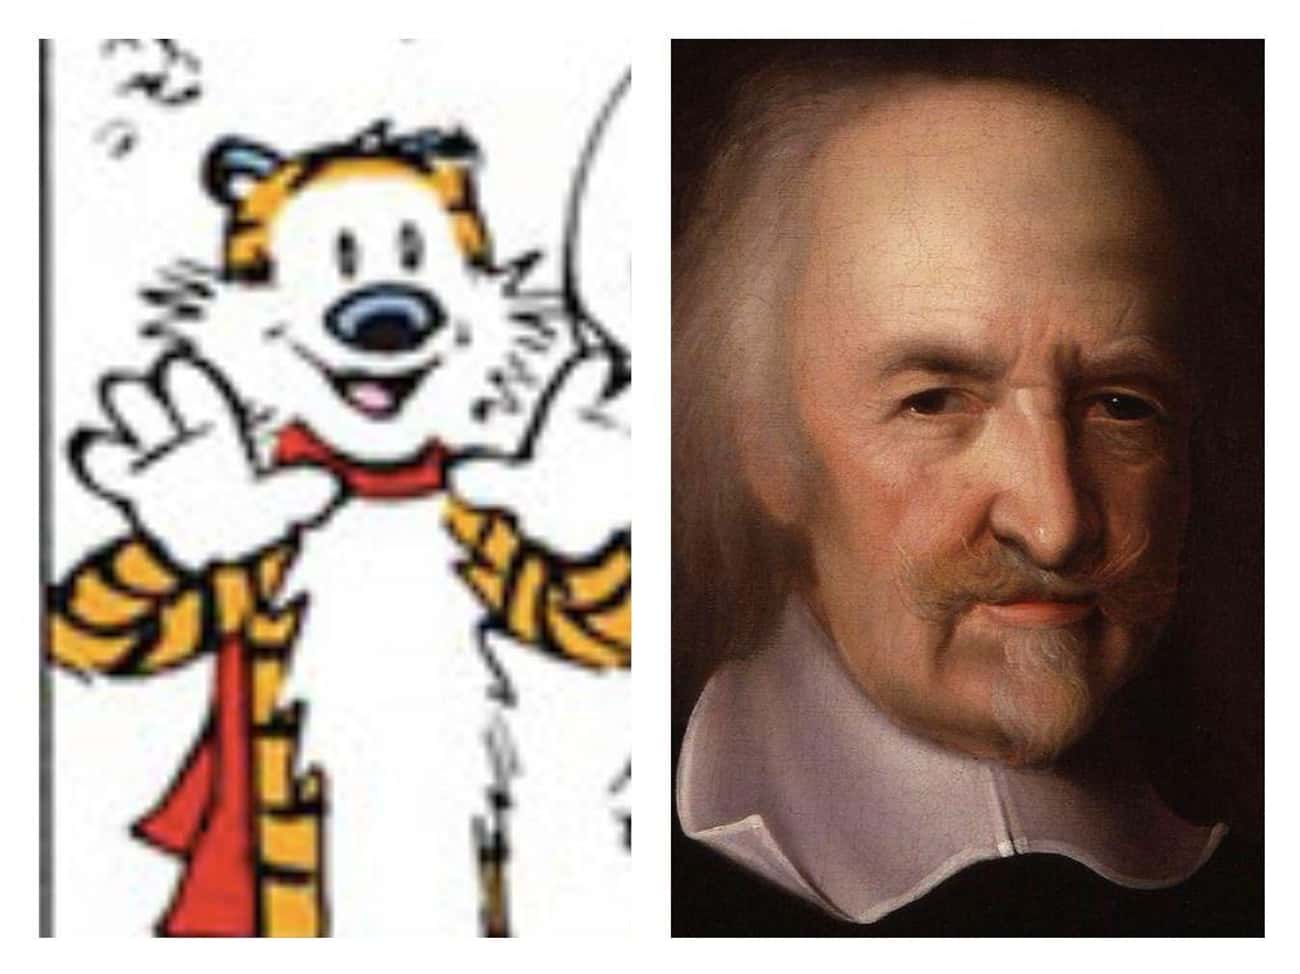 Hobbes Is Named For An English Social Philosopher